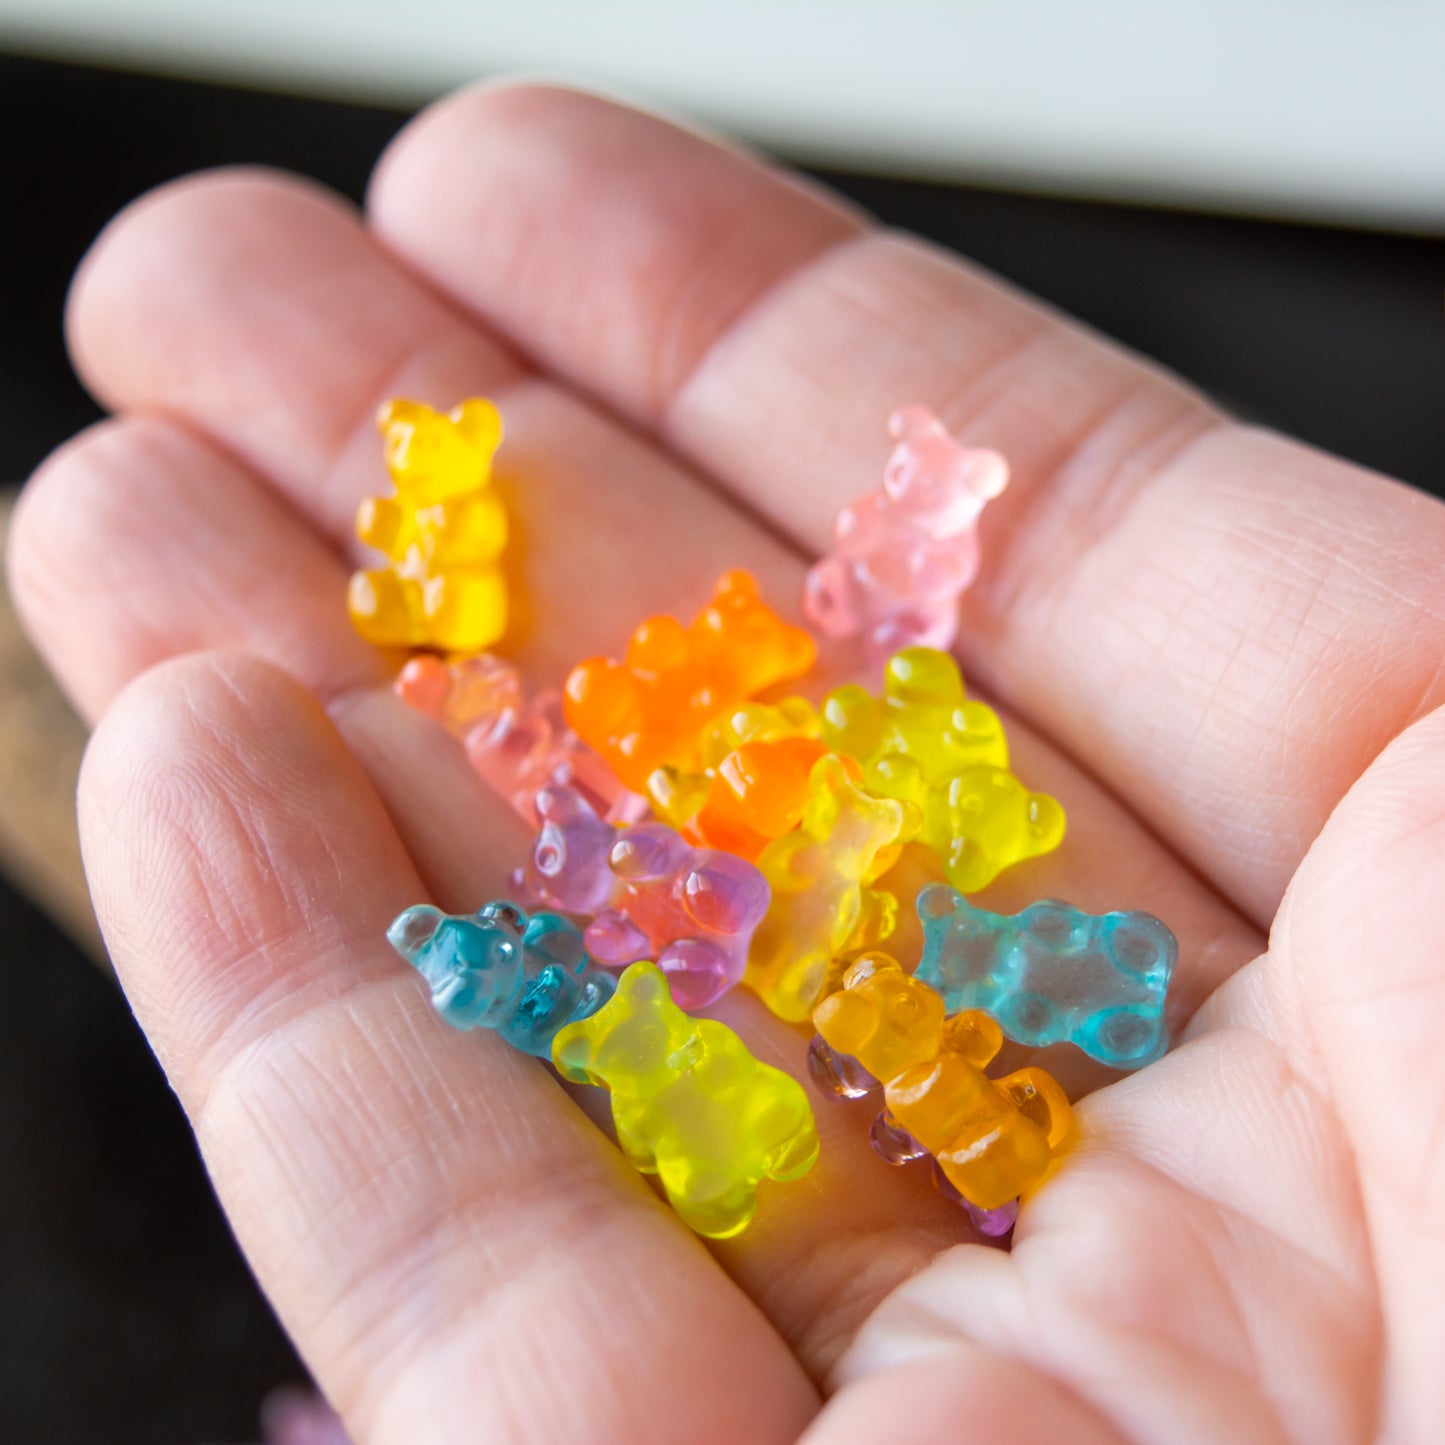 12x7mm Gummy Bear Shaped Cabochons in Colorful Resin